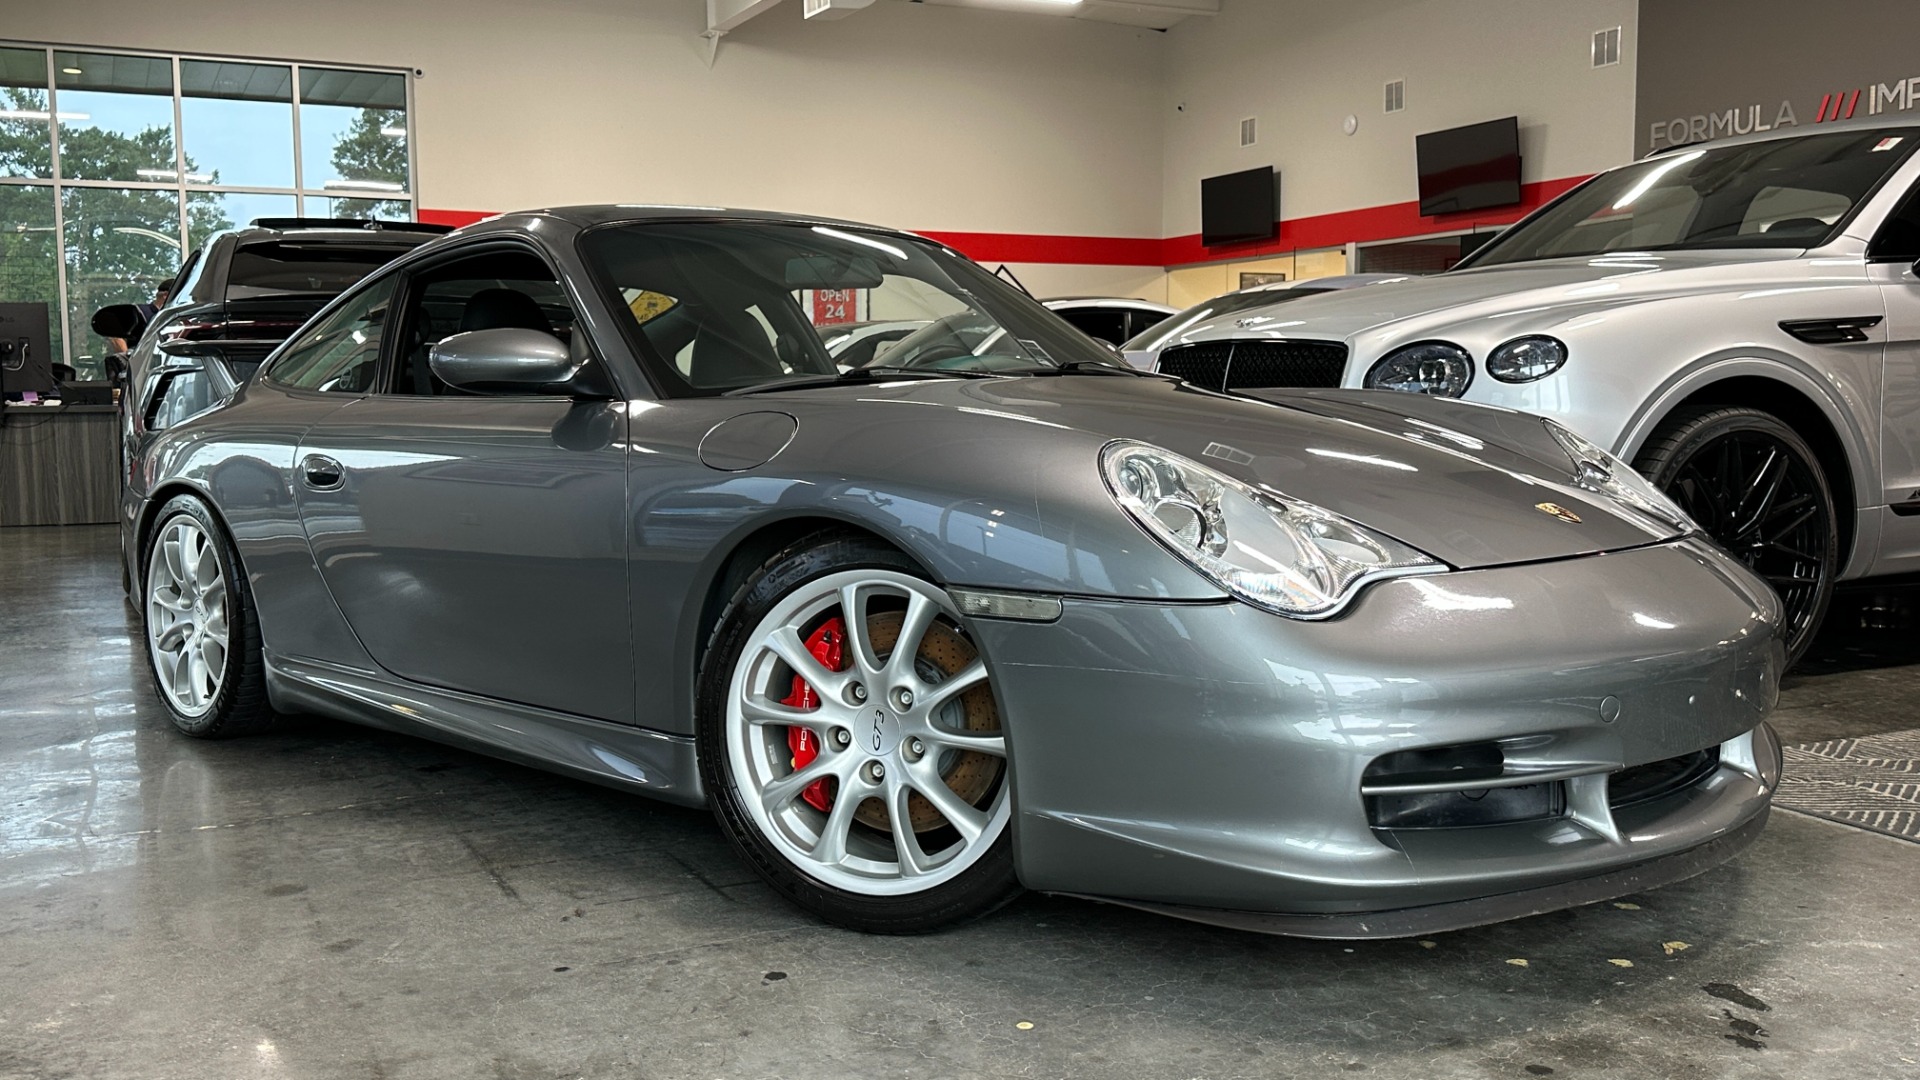 Used 2004 Porsche 911 GT3 / SPORTS SEATS / SERVICE BINDER / CLEAN DME for sale $121,900 at Formula Imports in Charlotte NC 28227 6